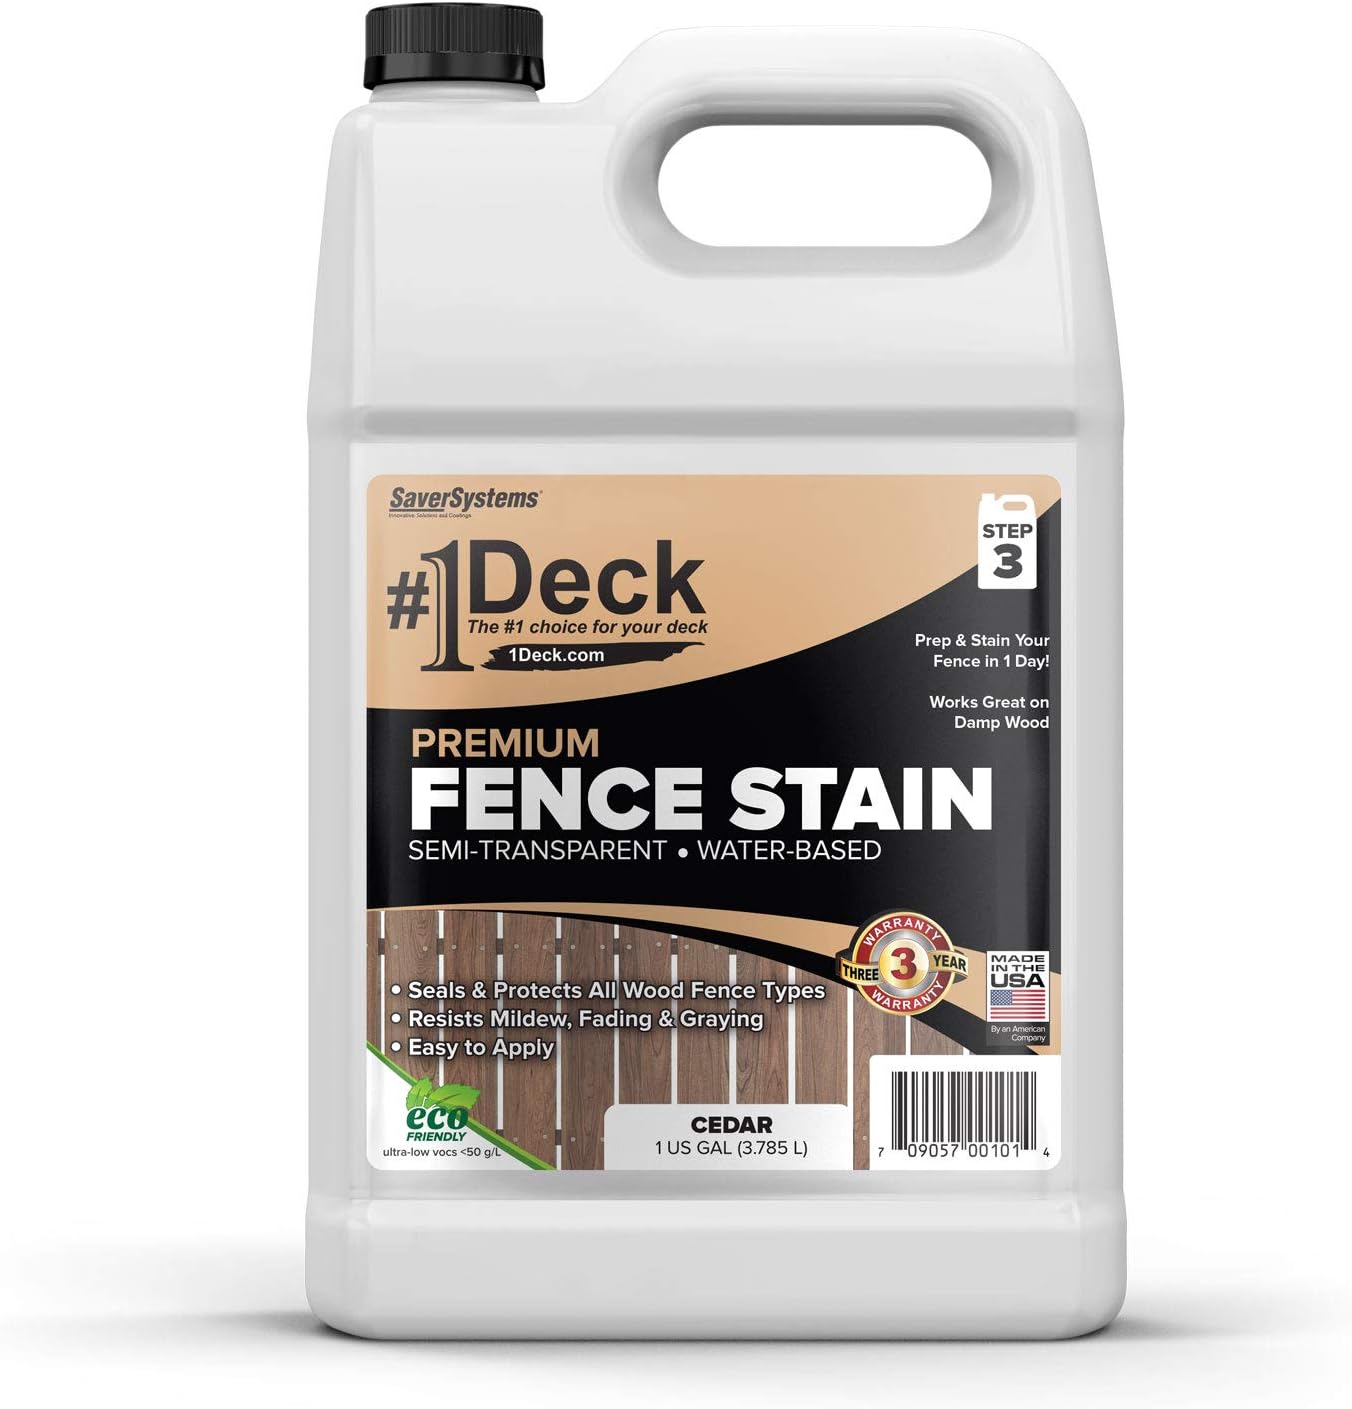 #1 Deck Premium Wood Fence Stain and Sealer - Semi- [...]